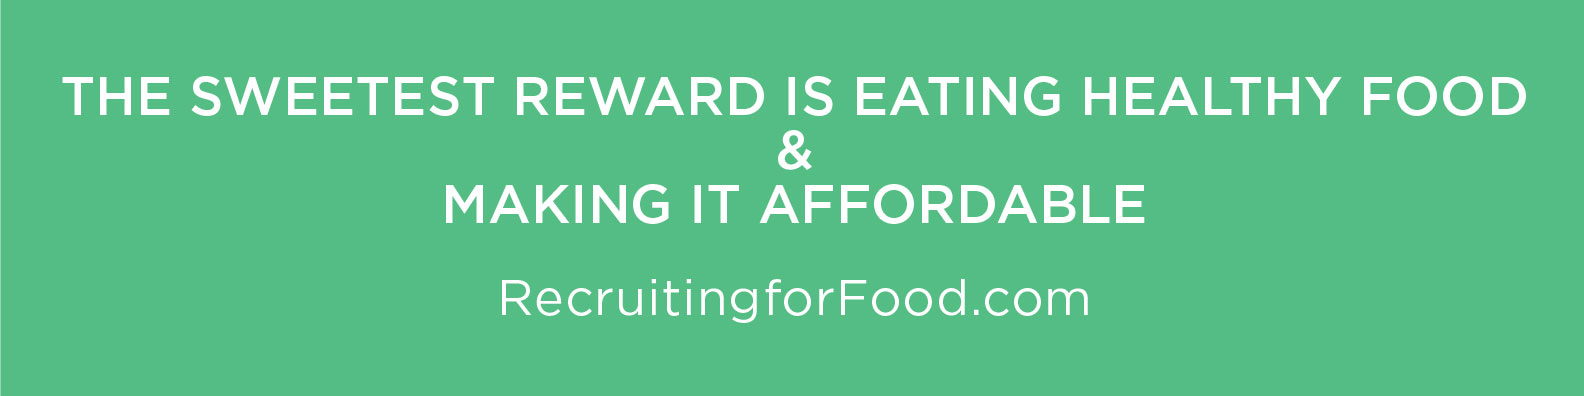 Staffing agency, Recruiting for Good helps companies find talented professionals and generates proceeds to make a positive impact. Participate in referral program to earn healthy food (groceries) saving reward www.RecruitingforFood.com